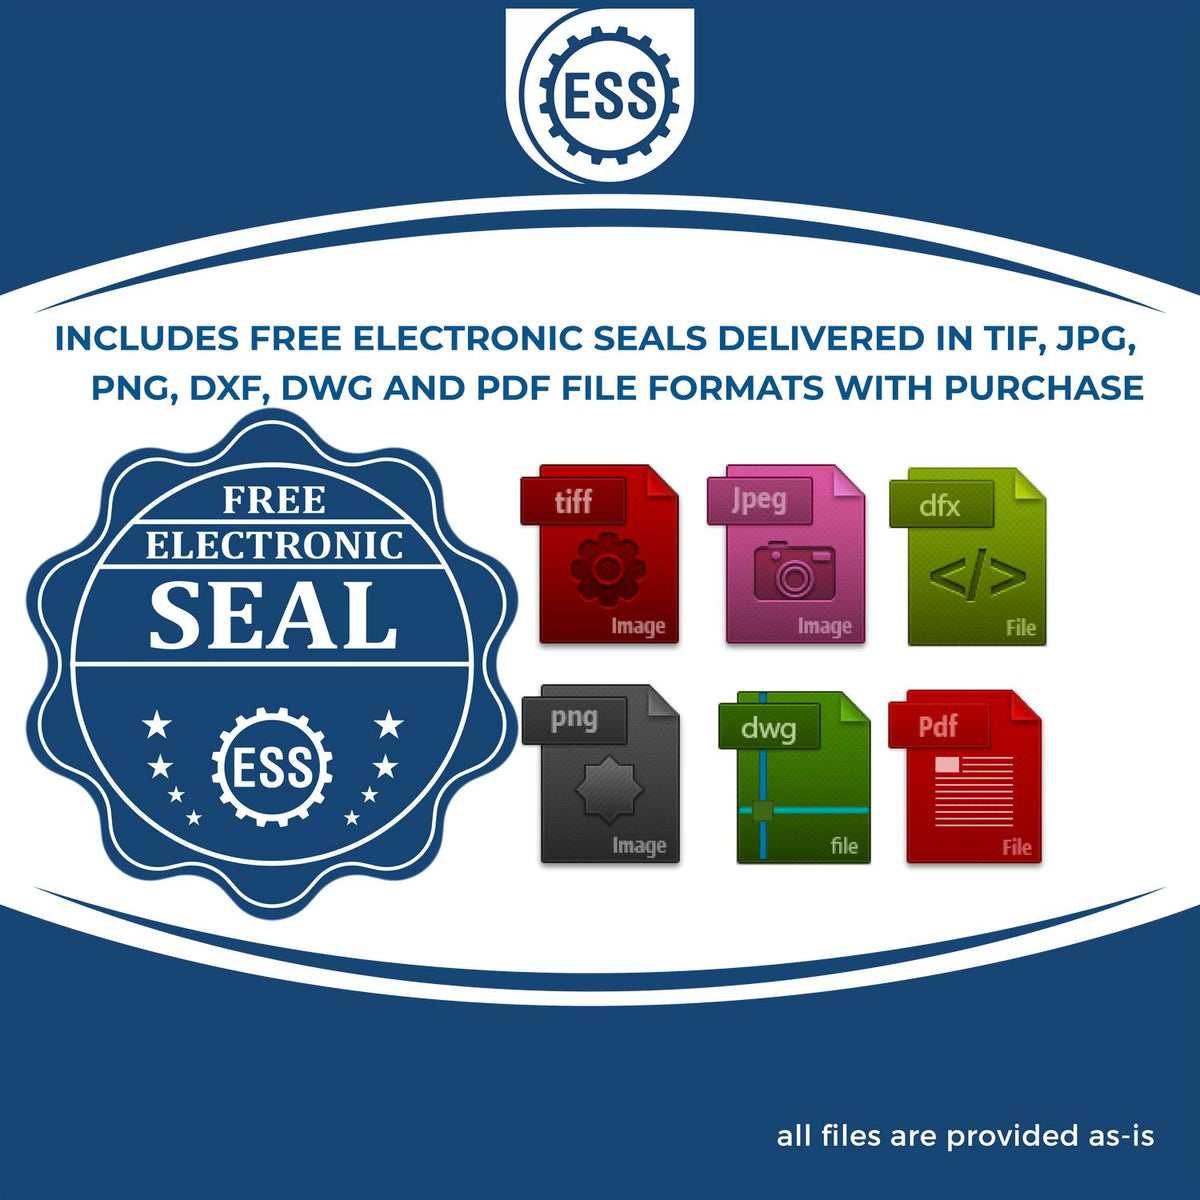 An infographic for the free electronic seal for the Self-Inking Ohio PE Stamp illustrating the different file type icons such as DXF, DWG, TIF, JPG and PNG.